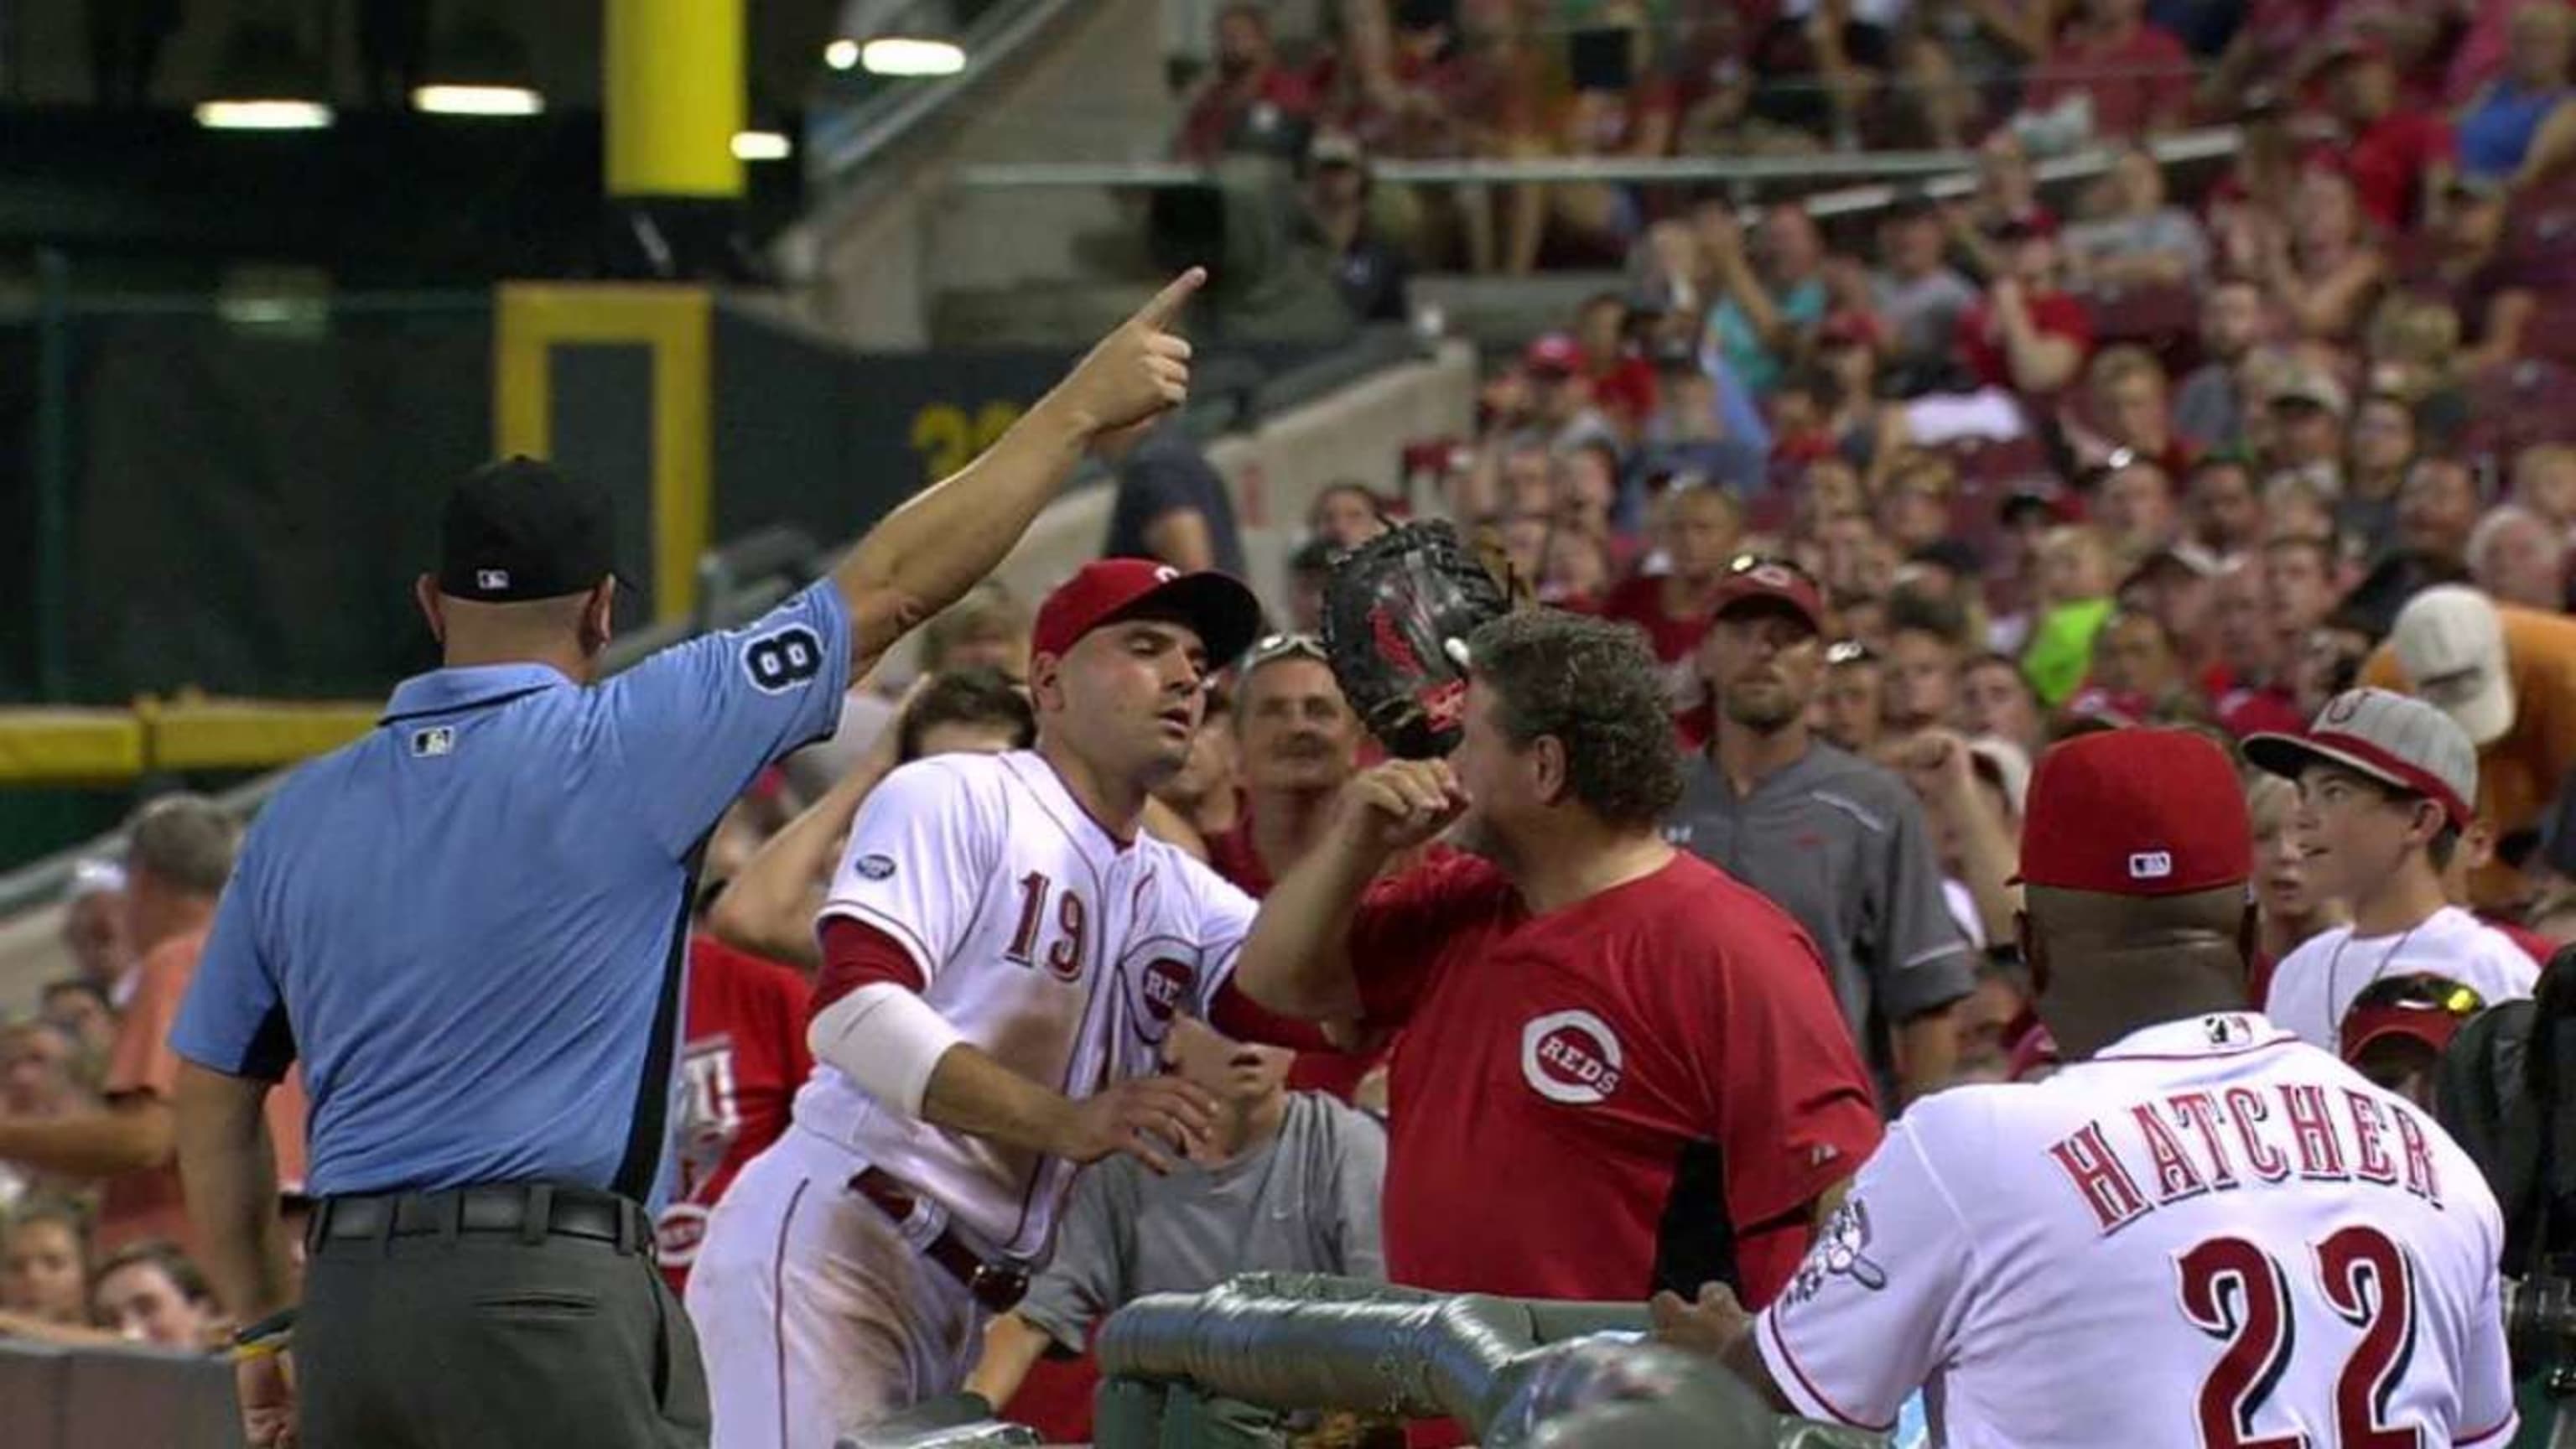 Joey Votto was a bit displeased with a foul-ball-reaching Reds fan